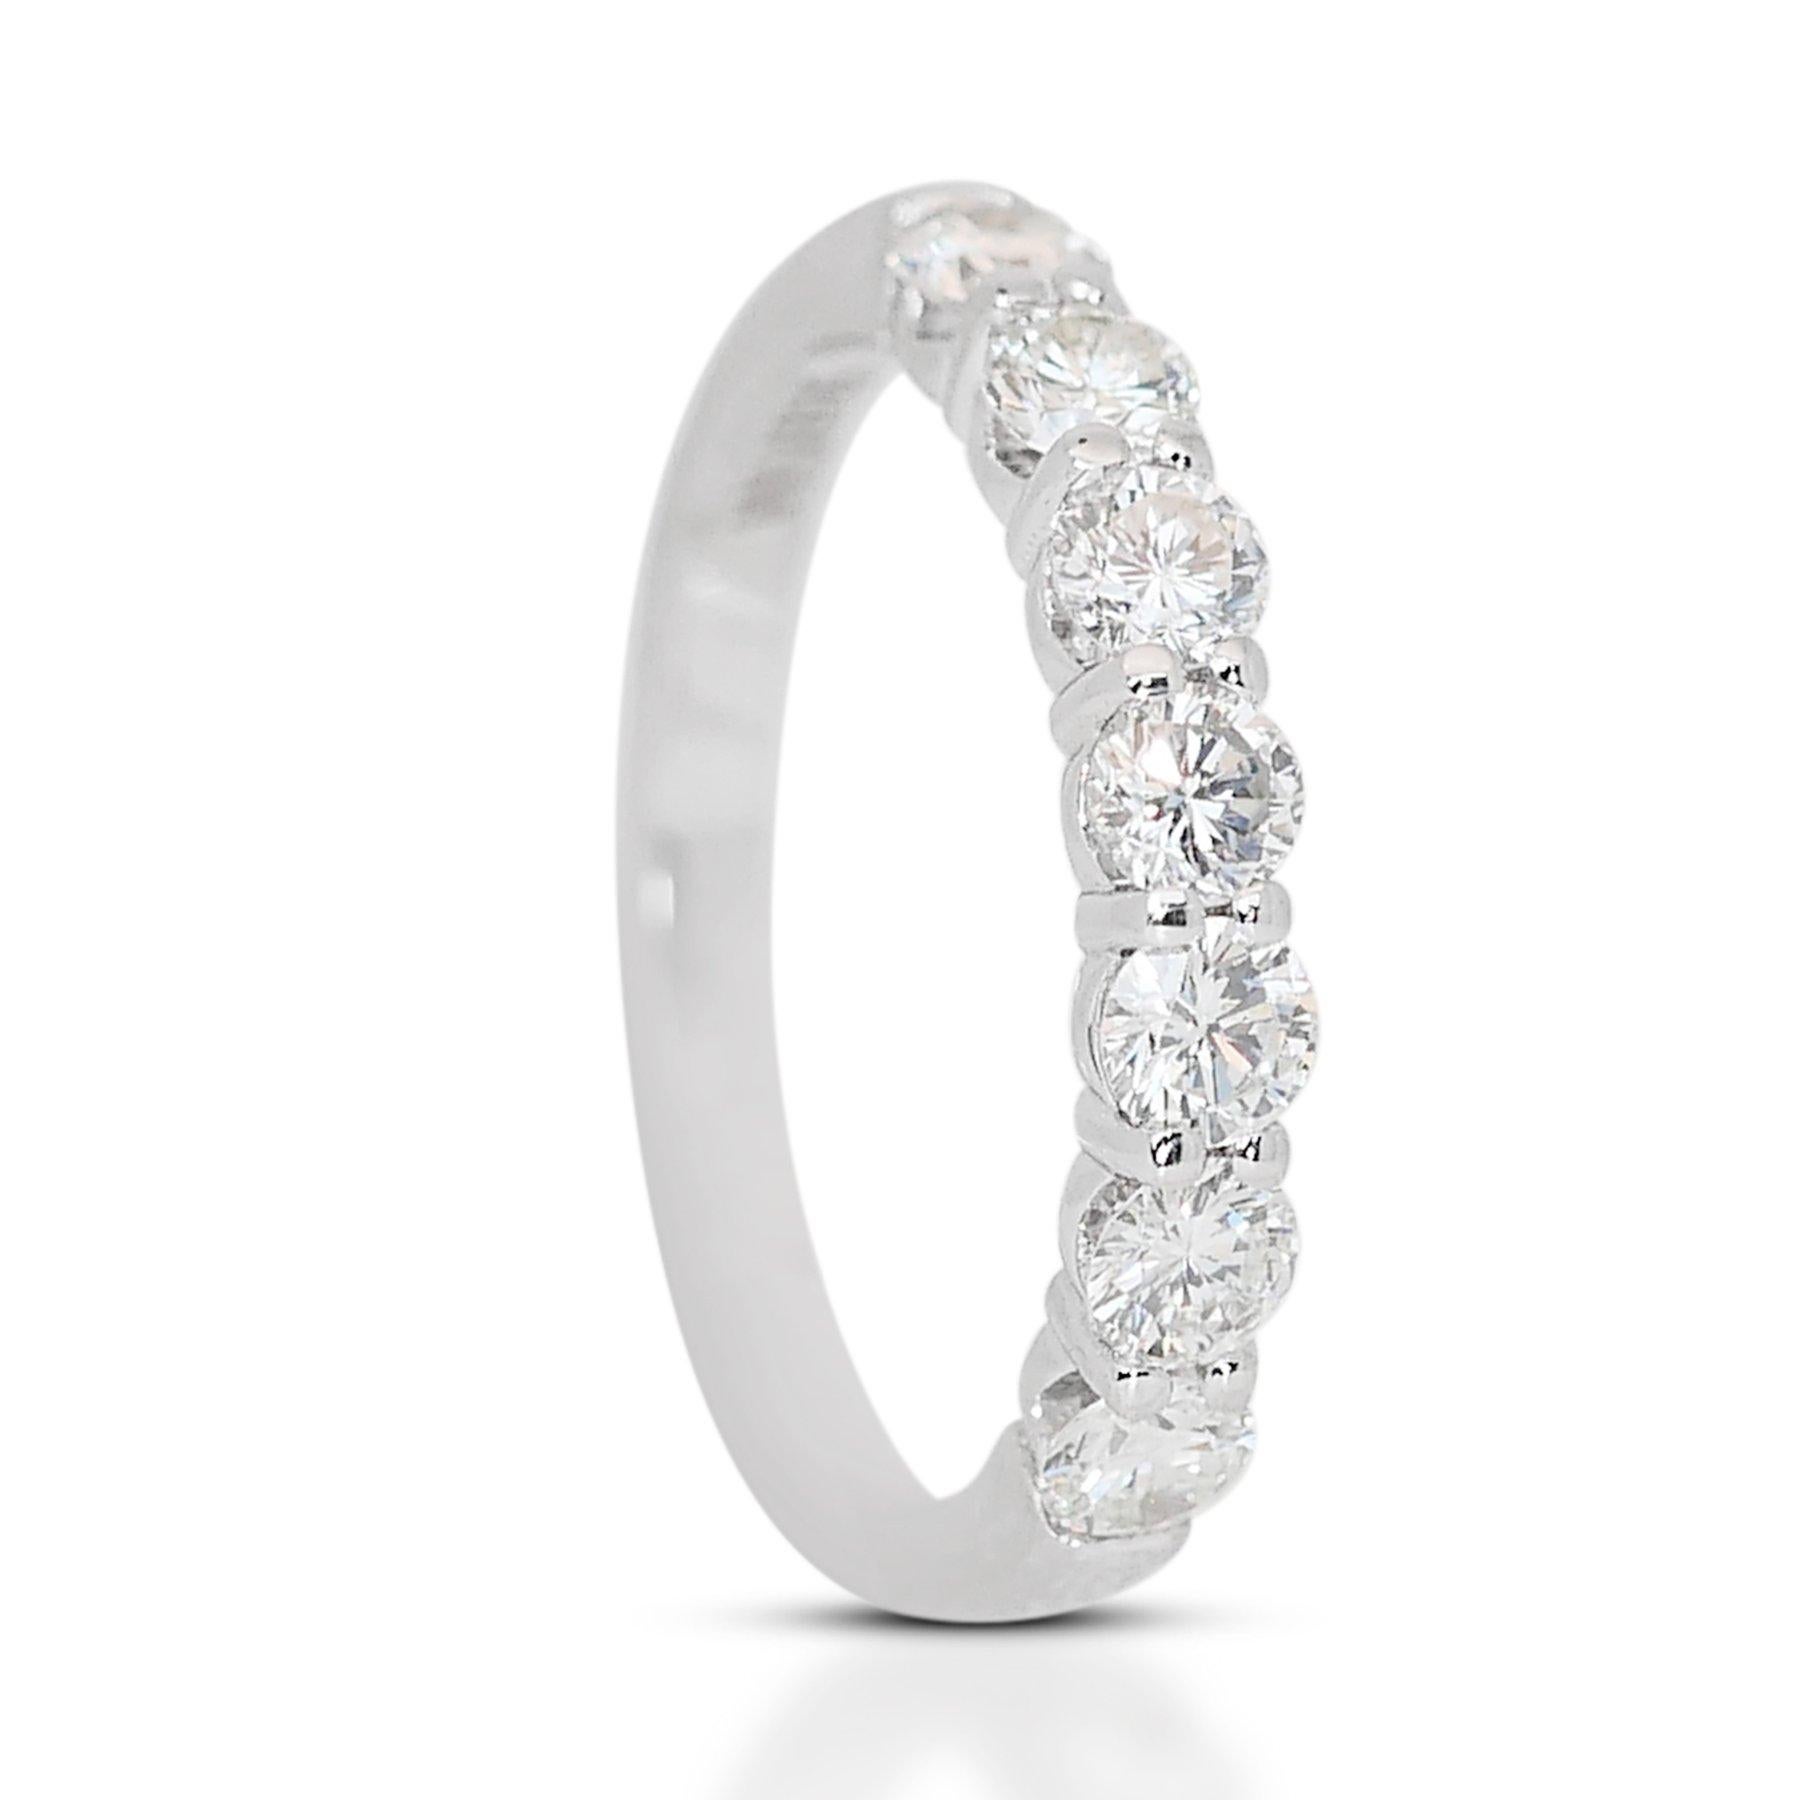 Stunning 2.10ct Diamonds 7-Stone Ring in 18k White Gold - GIA Certified

This exquisite 18k white gold 7-stone ring showcases a dazzling array of seven round diamonds, totaling 2.10 carats, each one chosen for its exceptional quality. The diamonds